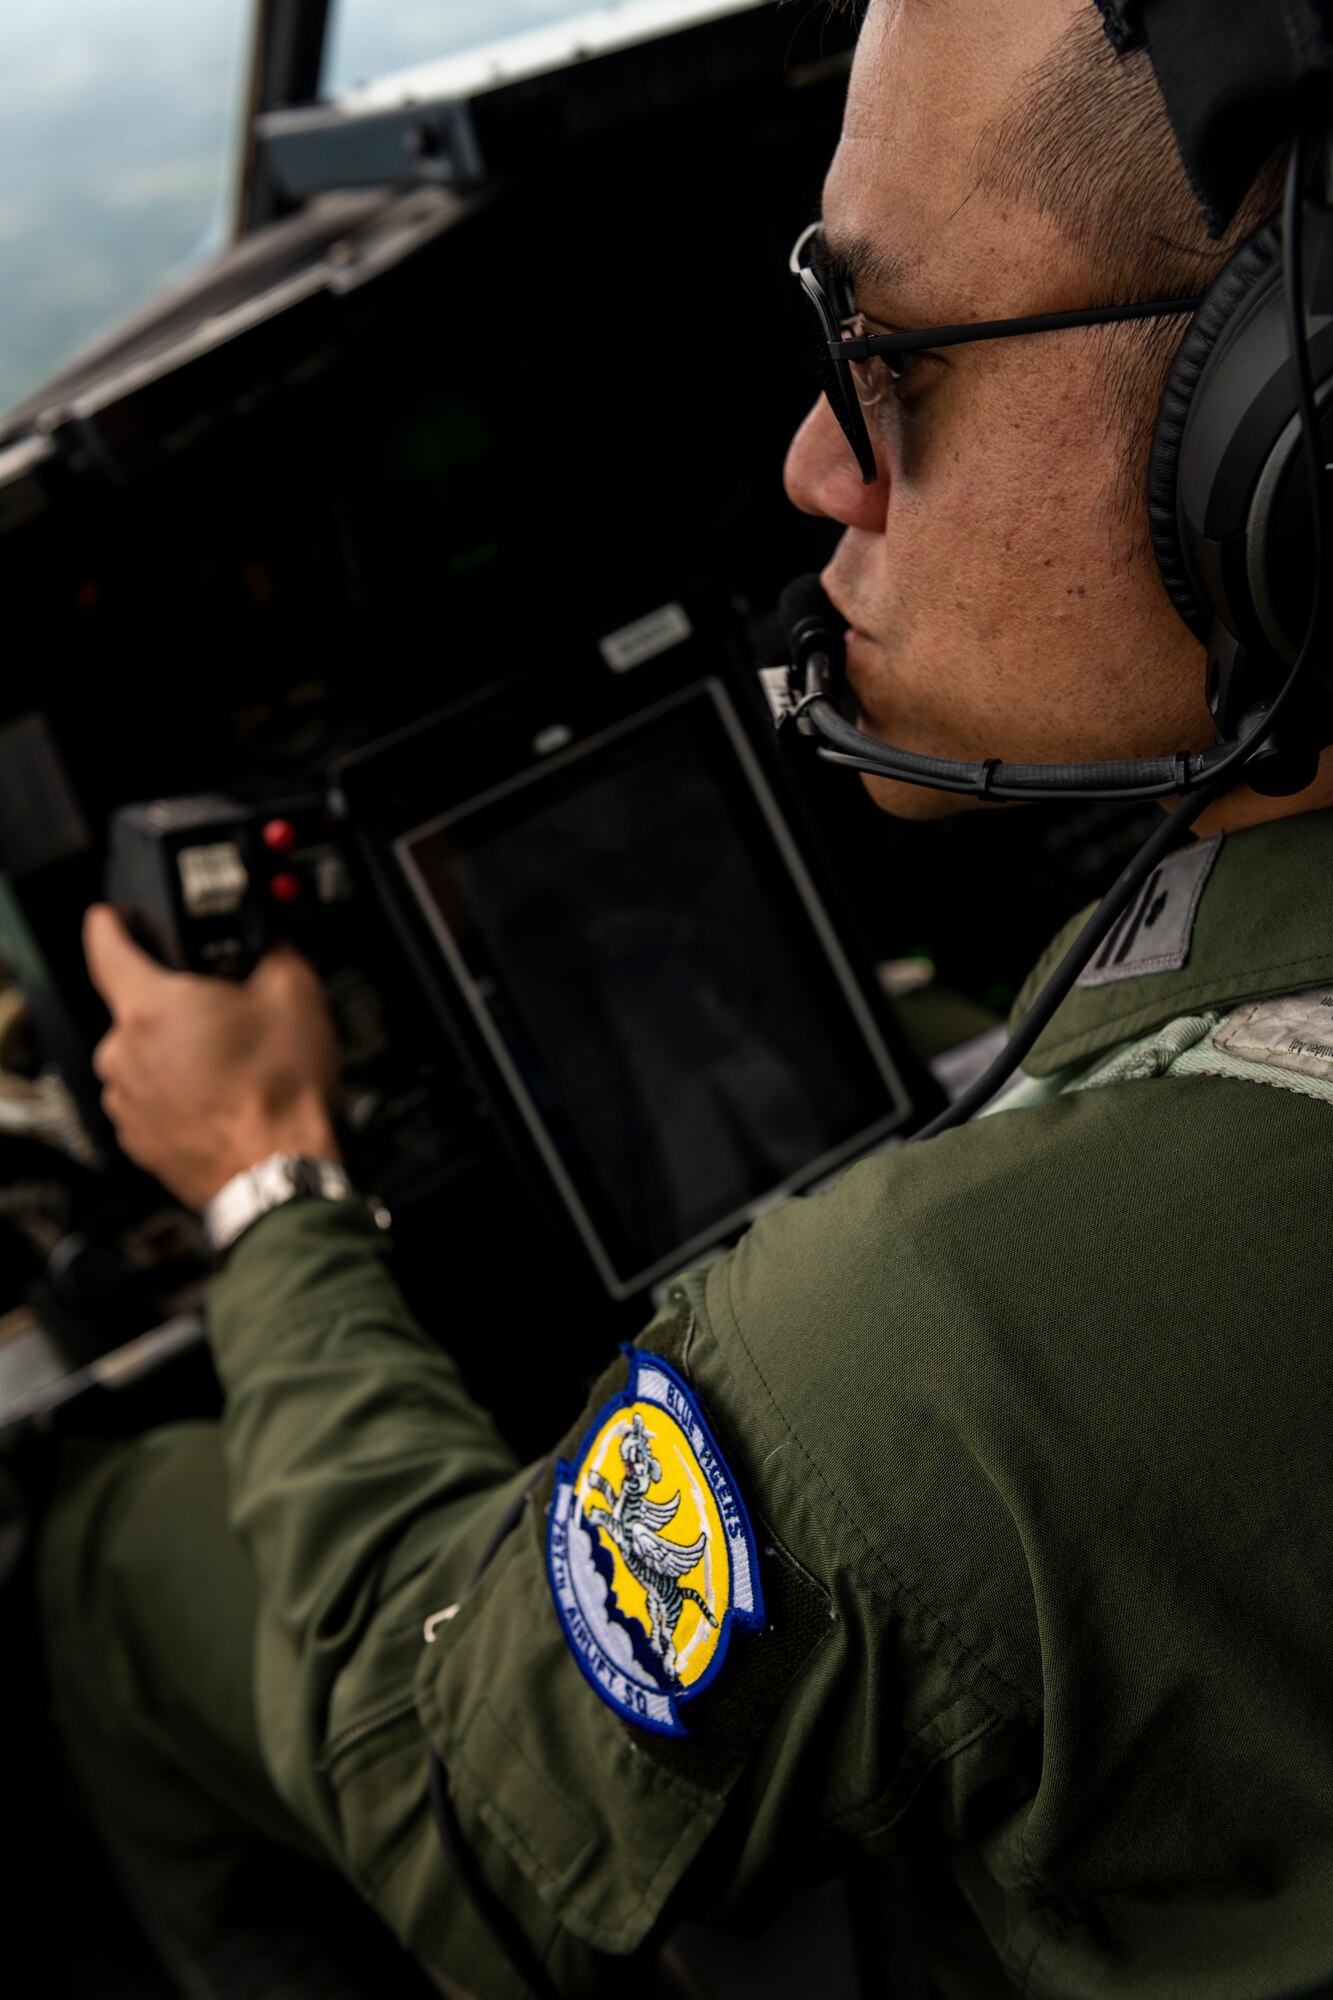 Maj. Kazunori Takahara, a pilot with the Japan Air-Self Defense Force’s 1st Tactical Airlift Wing, flight commands a 757th Airlift Squadron C-130H Hercules aircraft, July 22, 2020, over Northeast Ohio. Takahara is a participant in the Defense Personnel Exchange Program, where he will spend two and a half years assigned to the United States Air Force’s 910th Airlift Wing. The DPEP is designed to nurture the bonds of friendship and understanding that exist between the two air forces through the exchange of ideas and tactics by the members of each service.